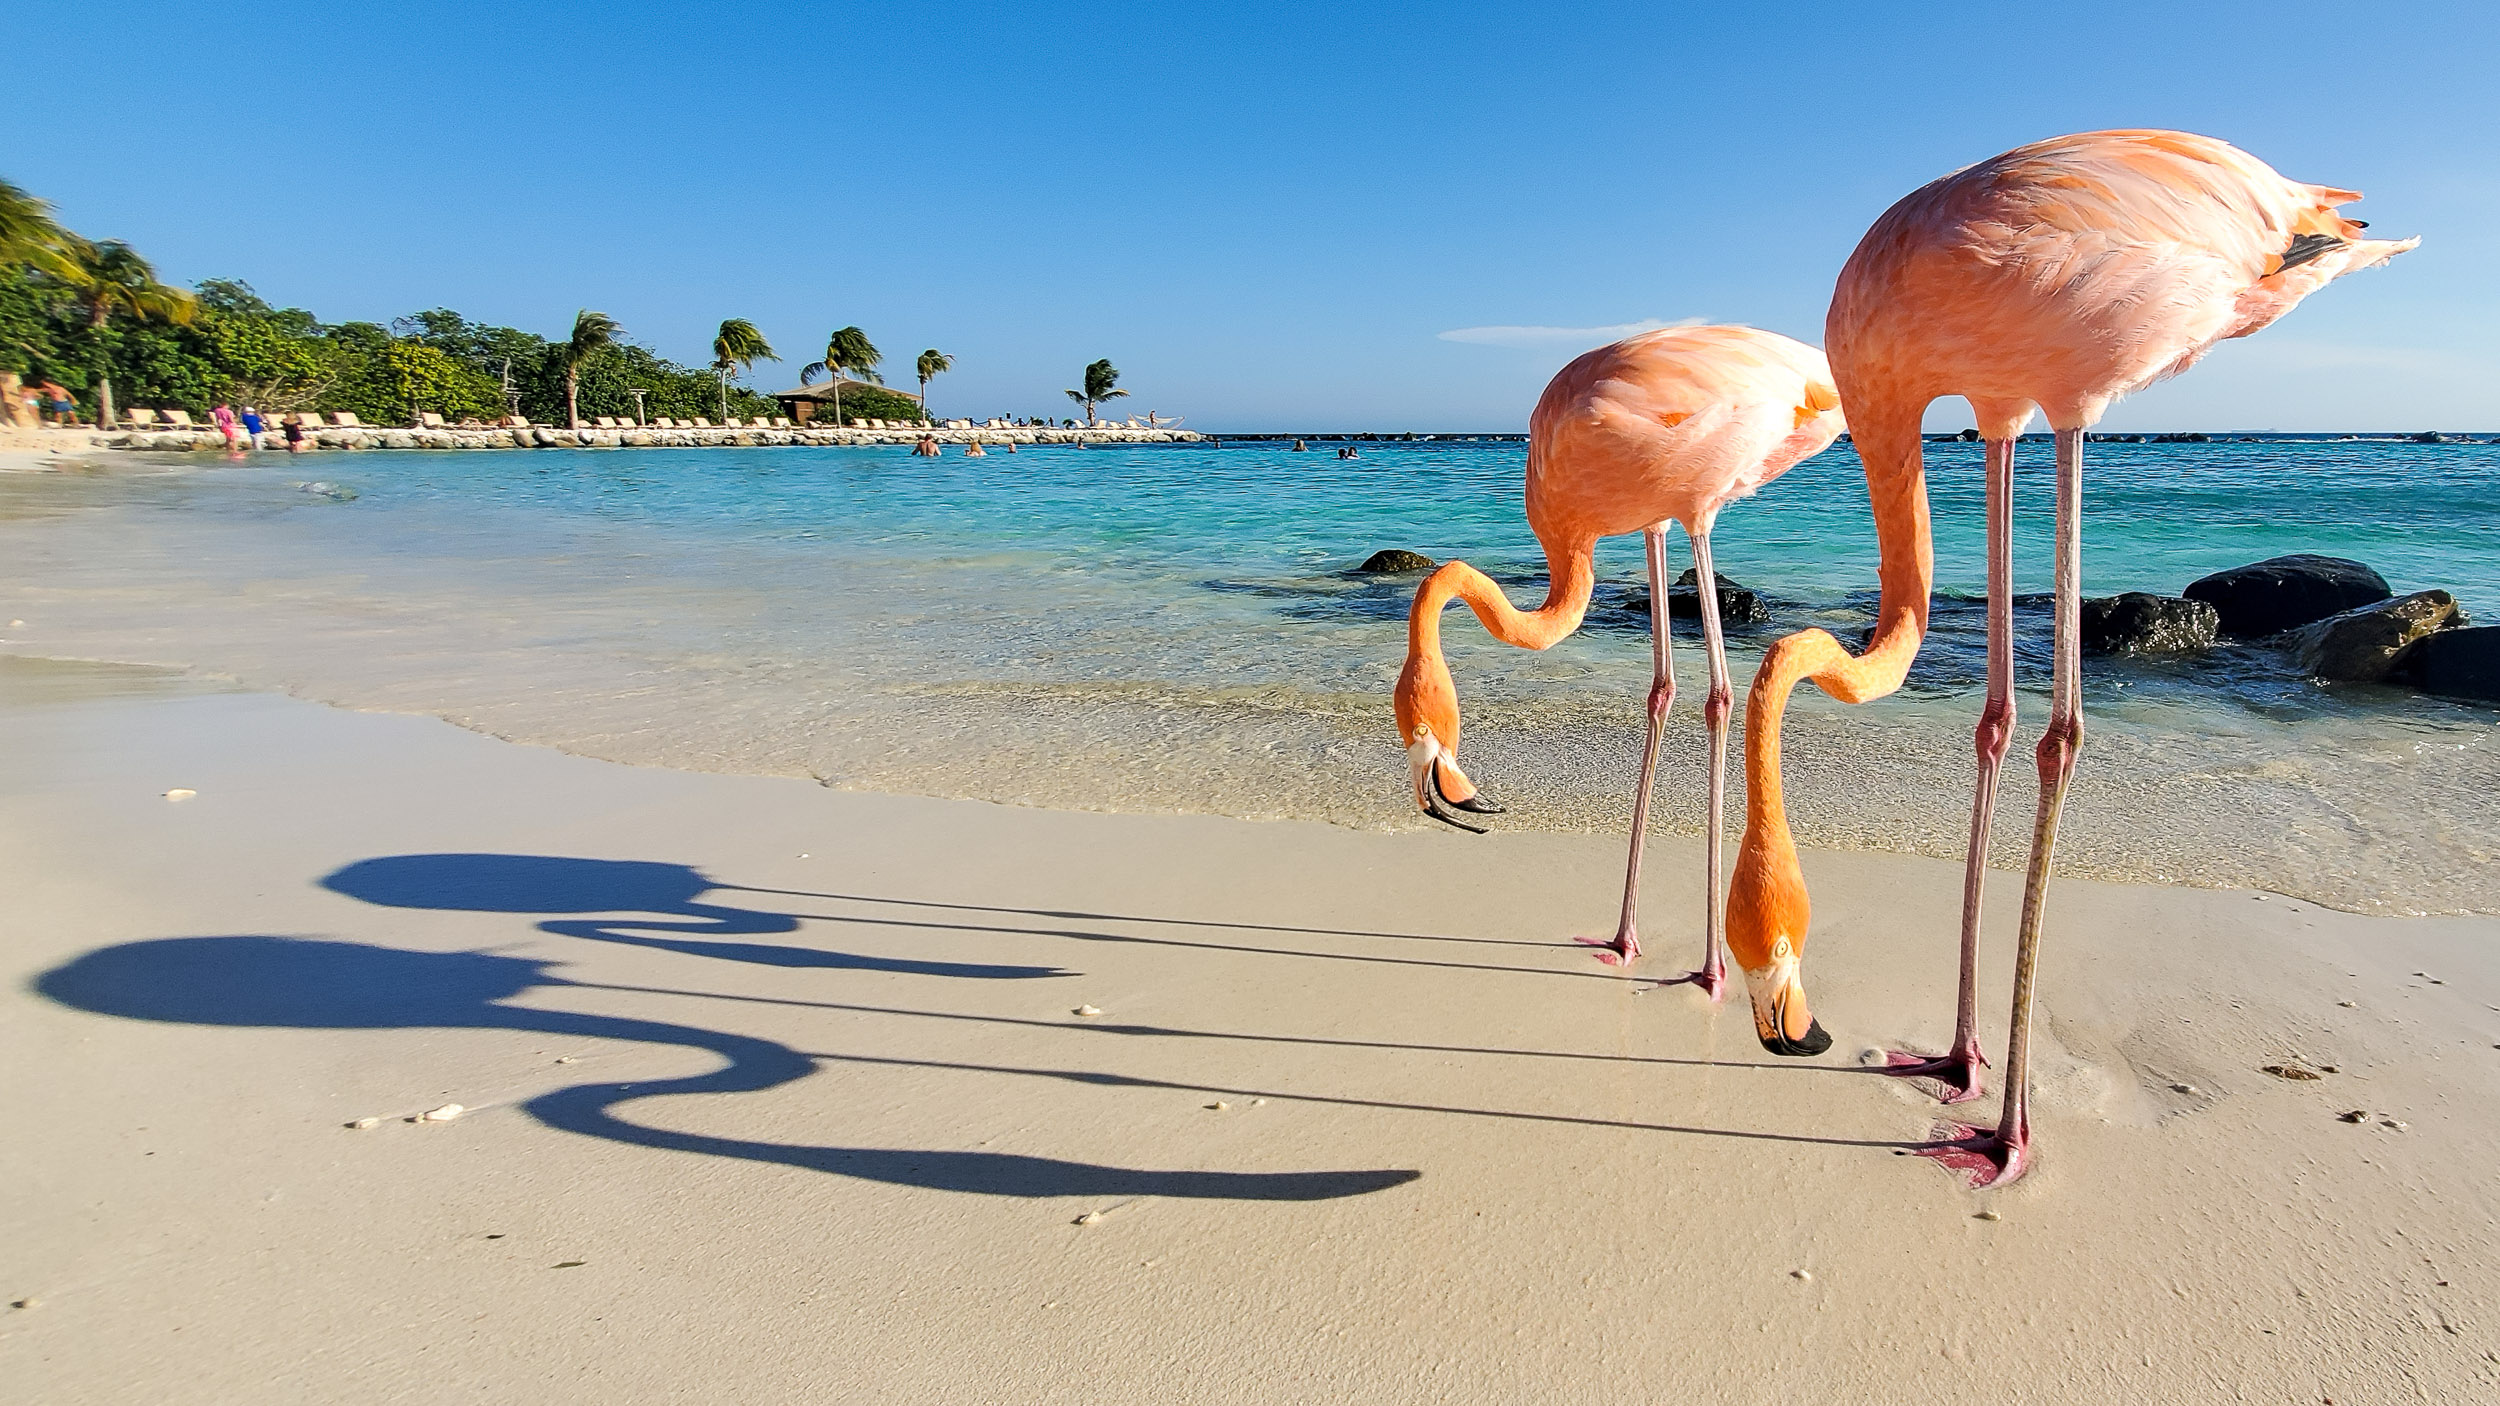 Two flamingos with their shadows